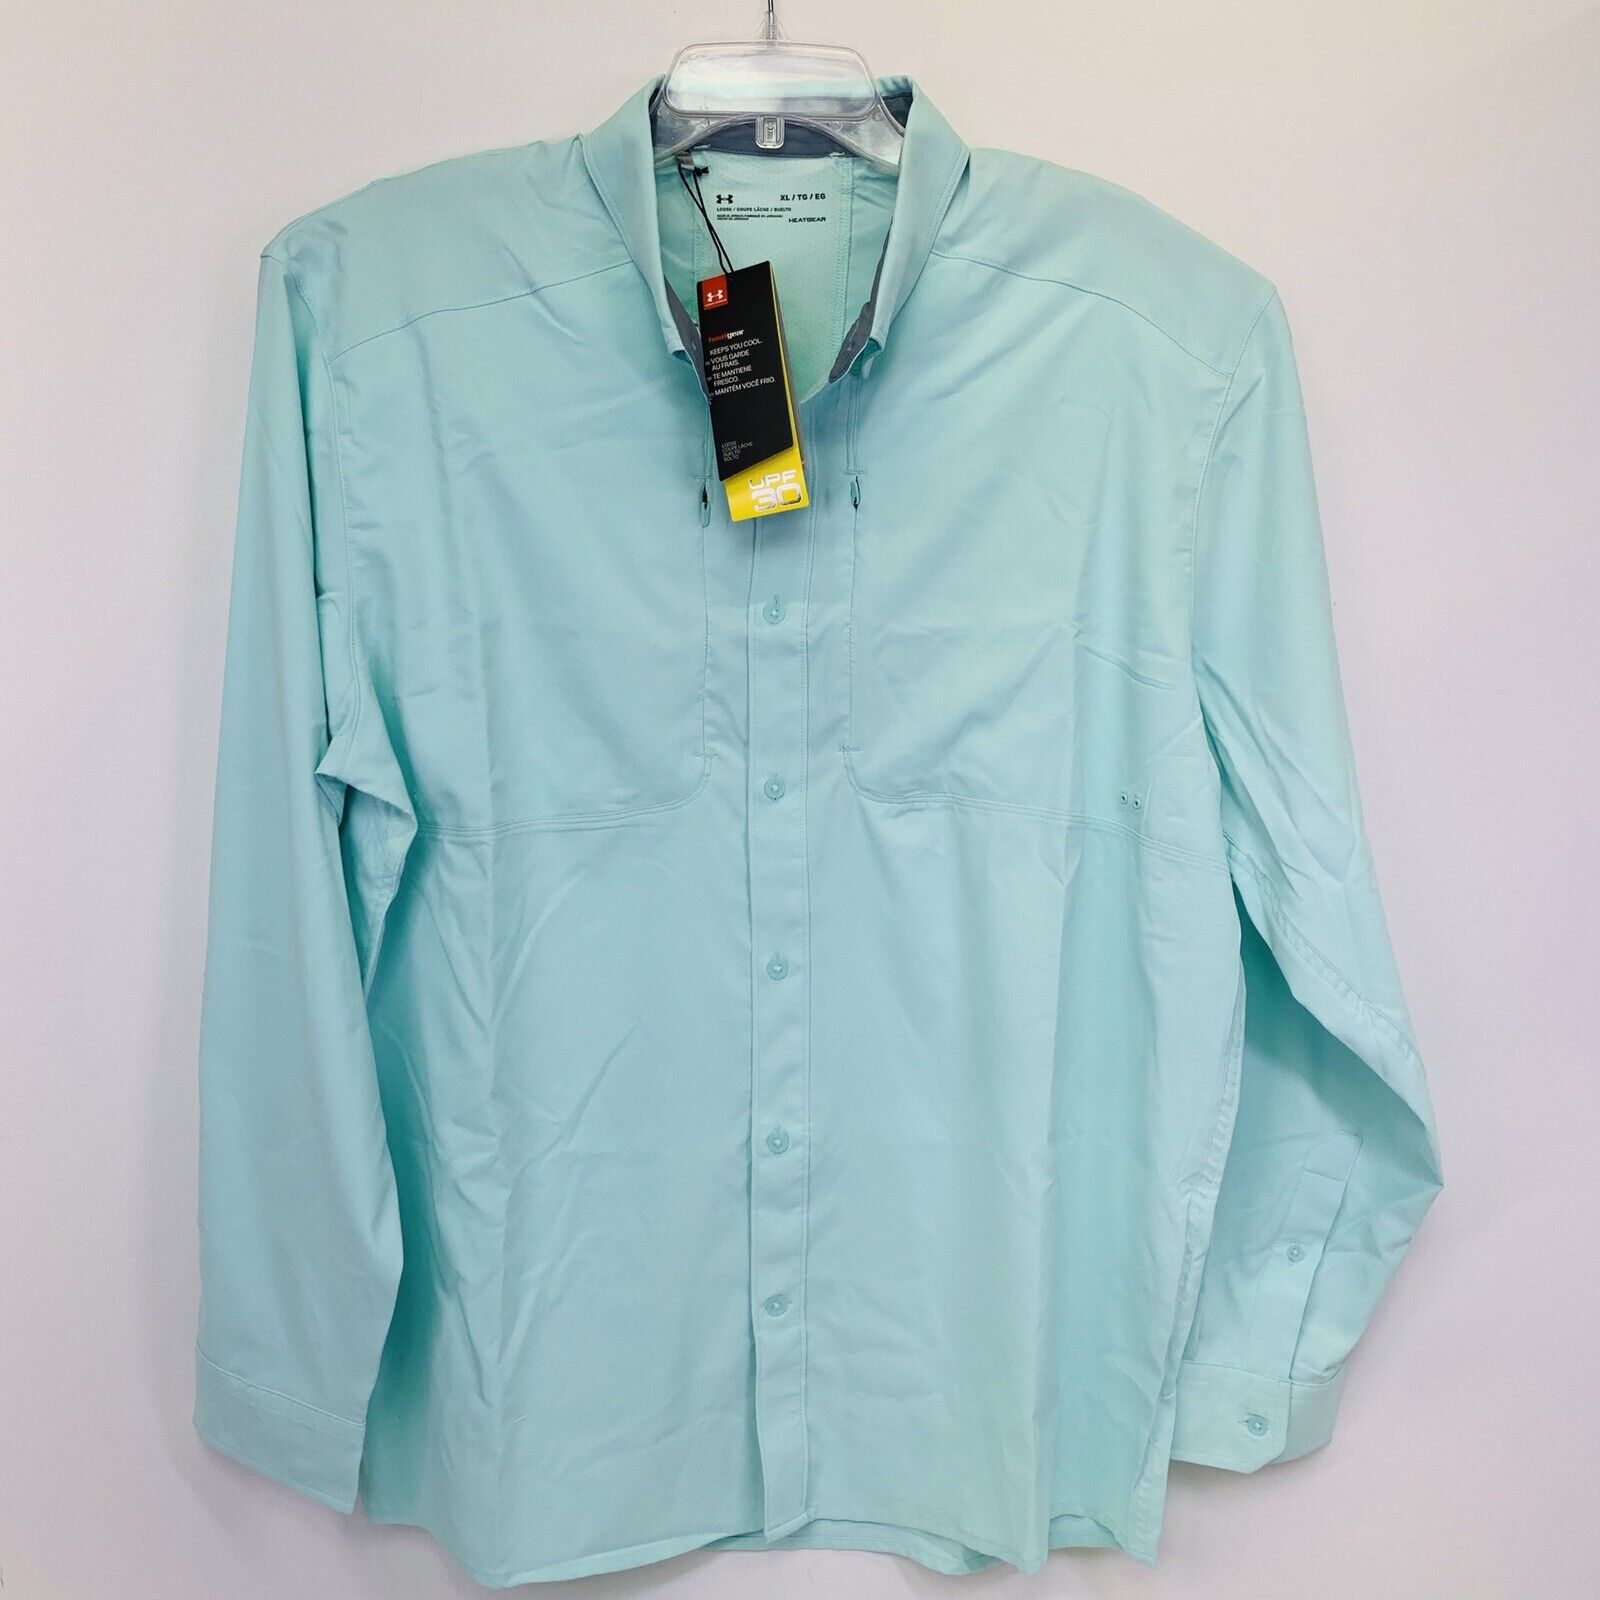 Under Armour Mens Xlarge  Mint Green UA Tide Chaser  Fishing Shirt NWT’s (O28)